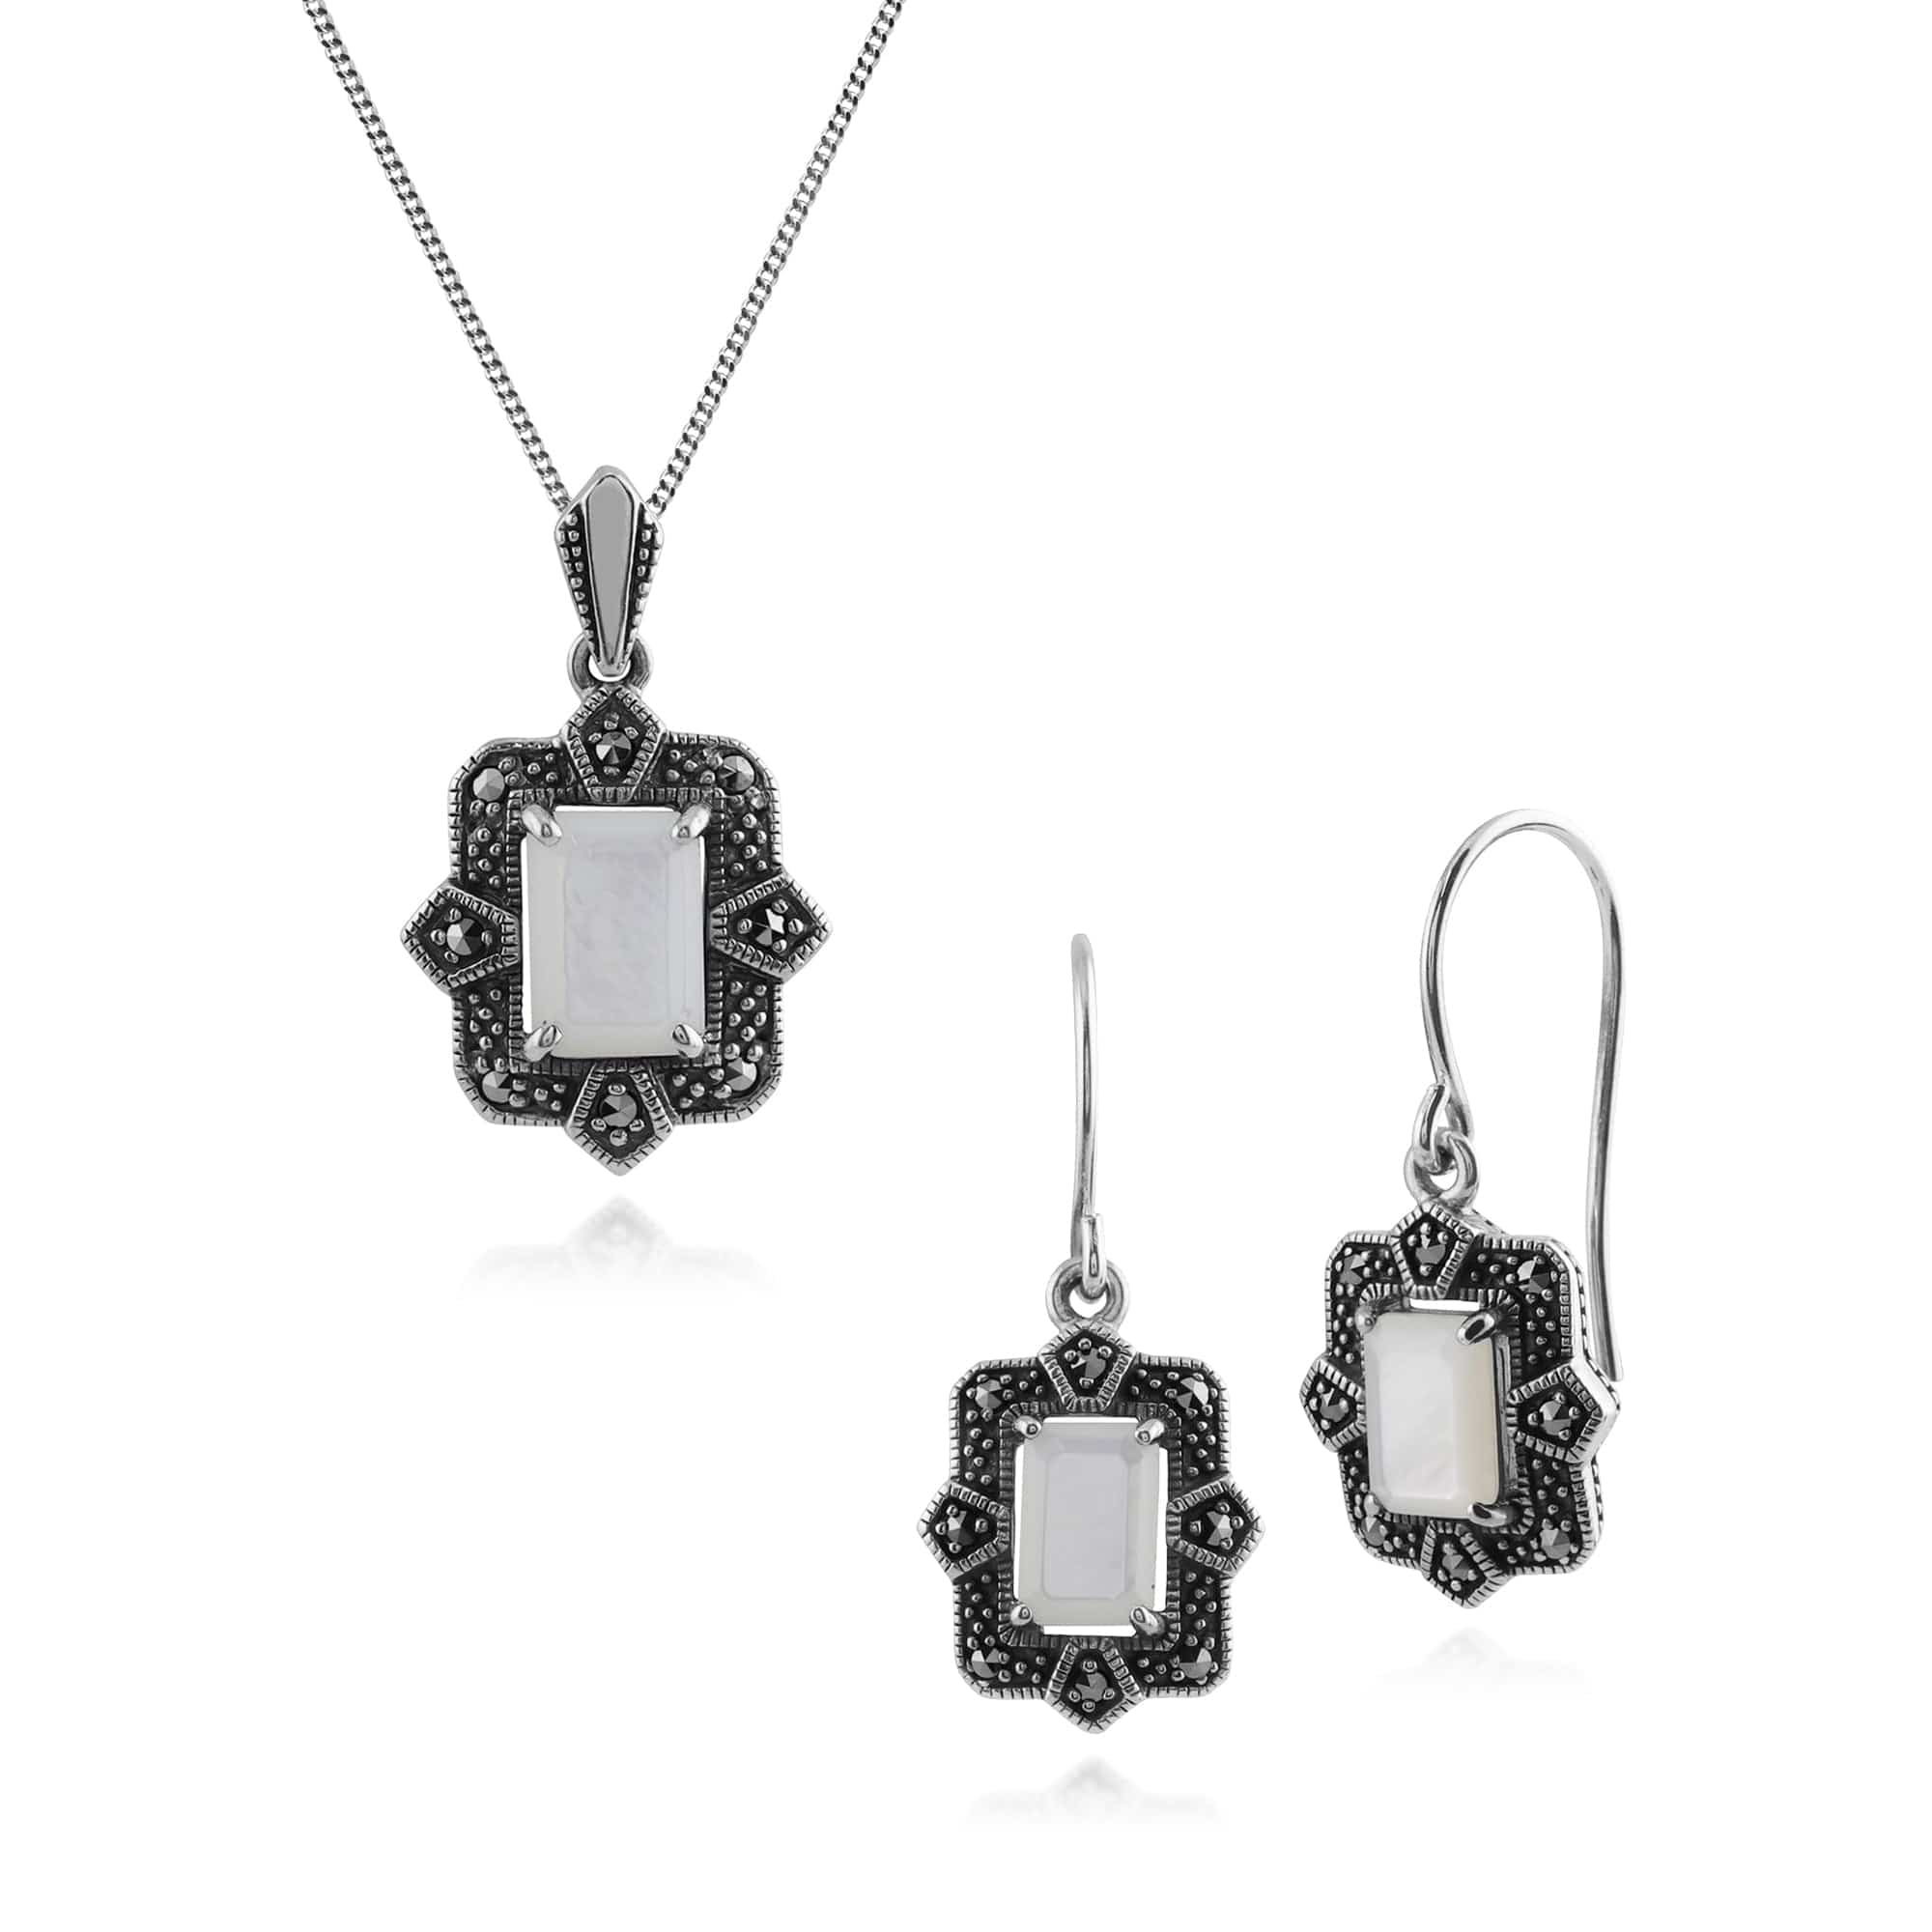 214E850302925-214P297802925 Art Deco Style Baguette Mother of Pearl & Marcasite Framed Drop Earrings & Pendant Set in 925 Sterling Silver 1